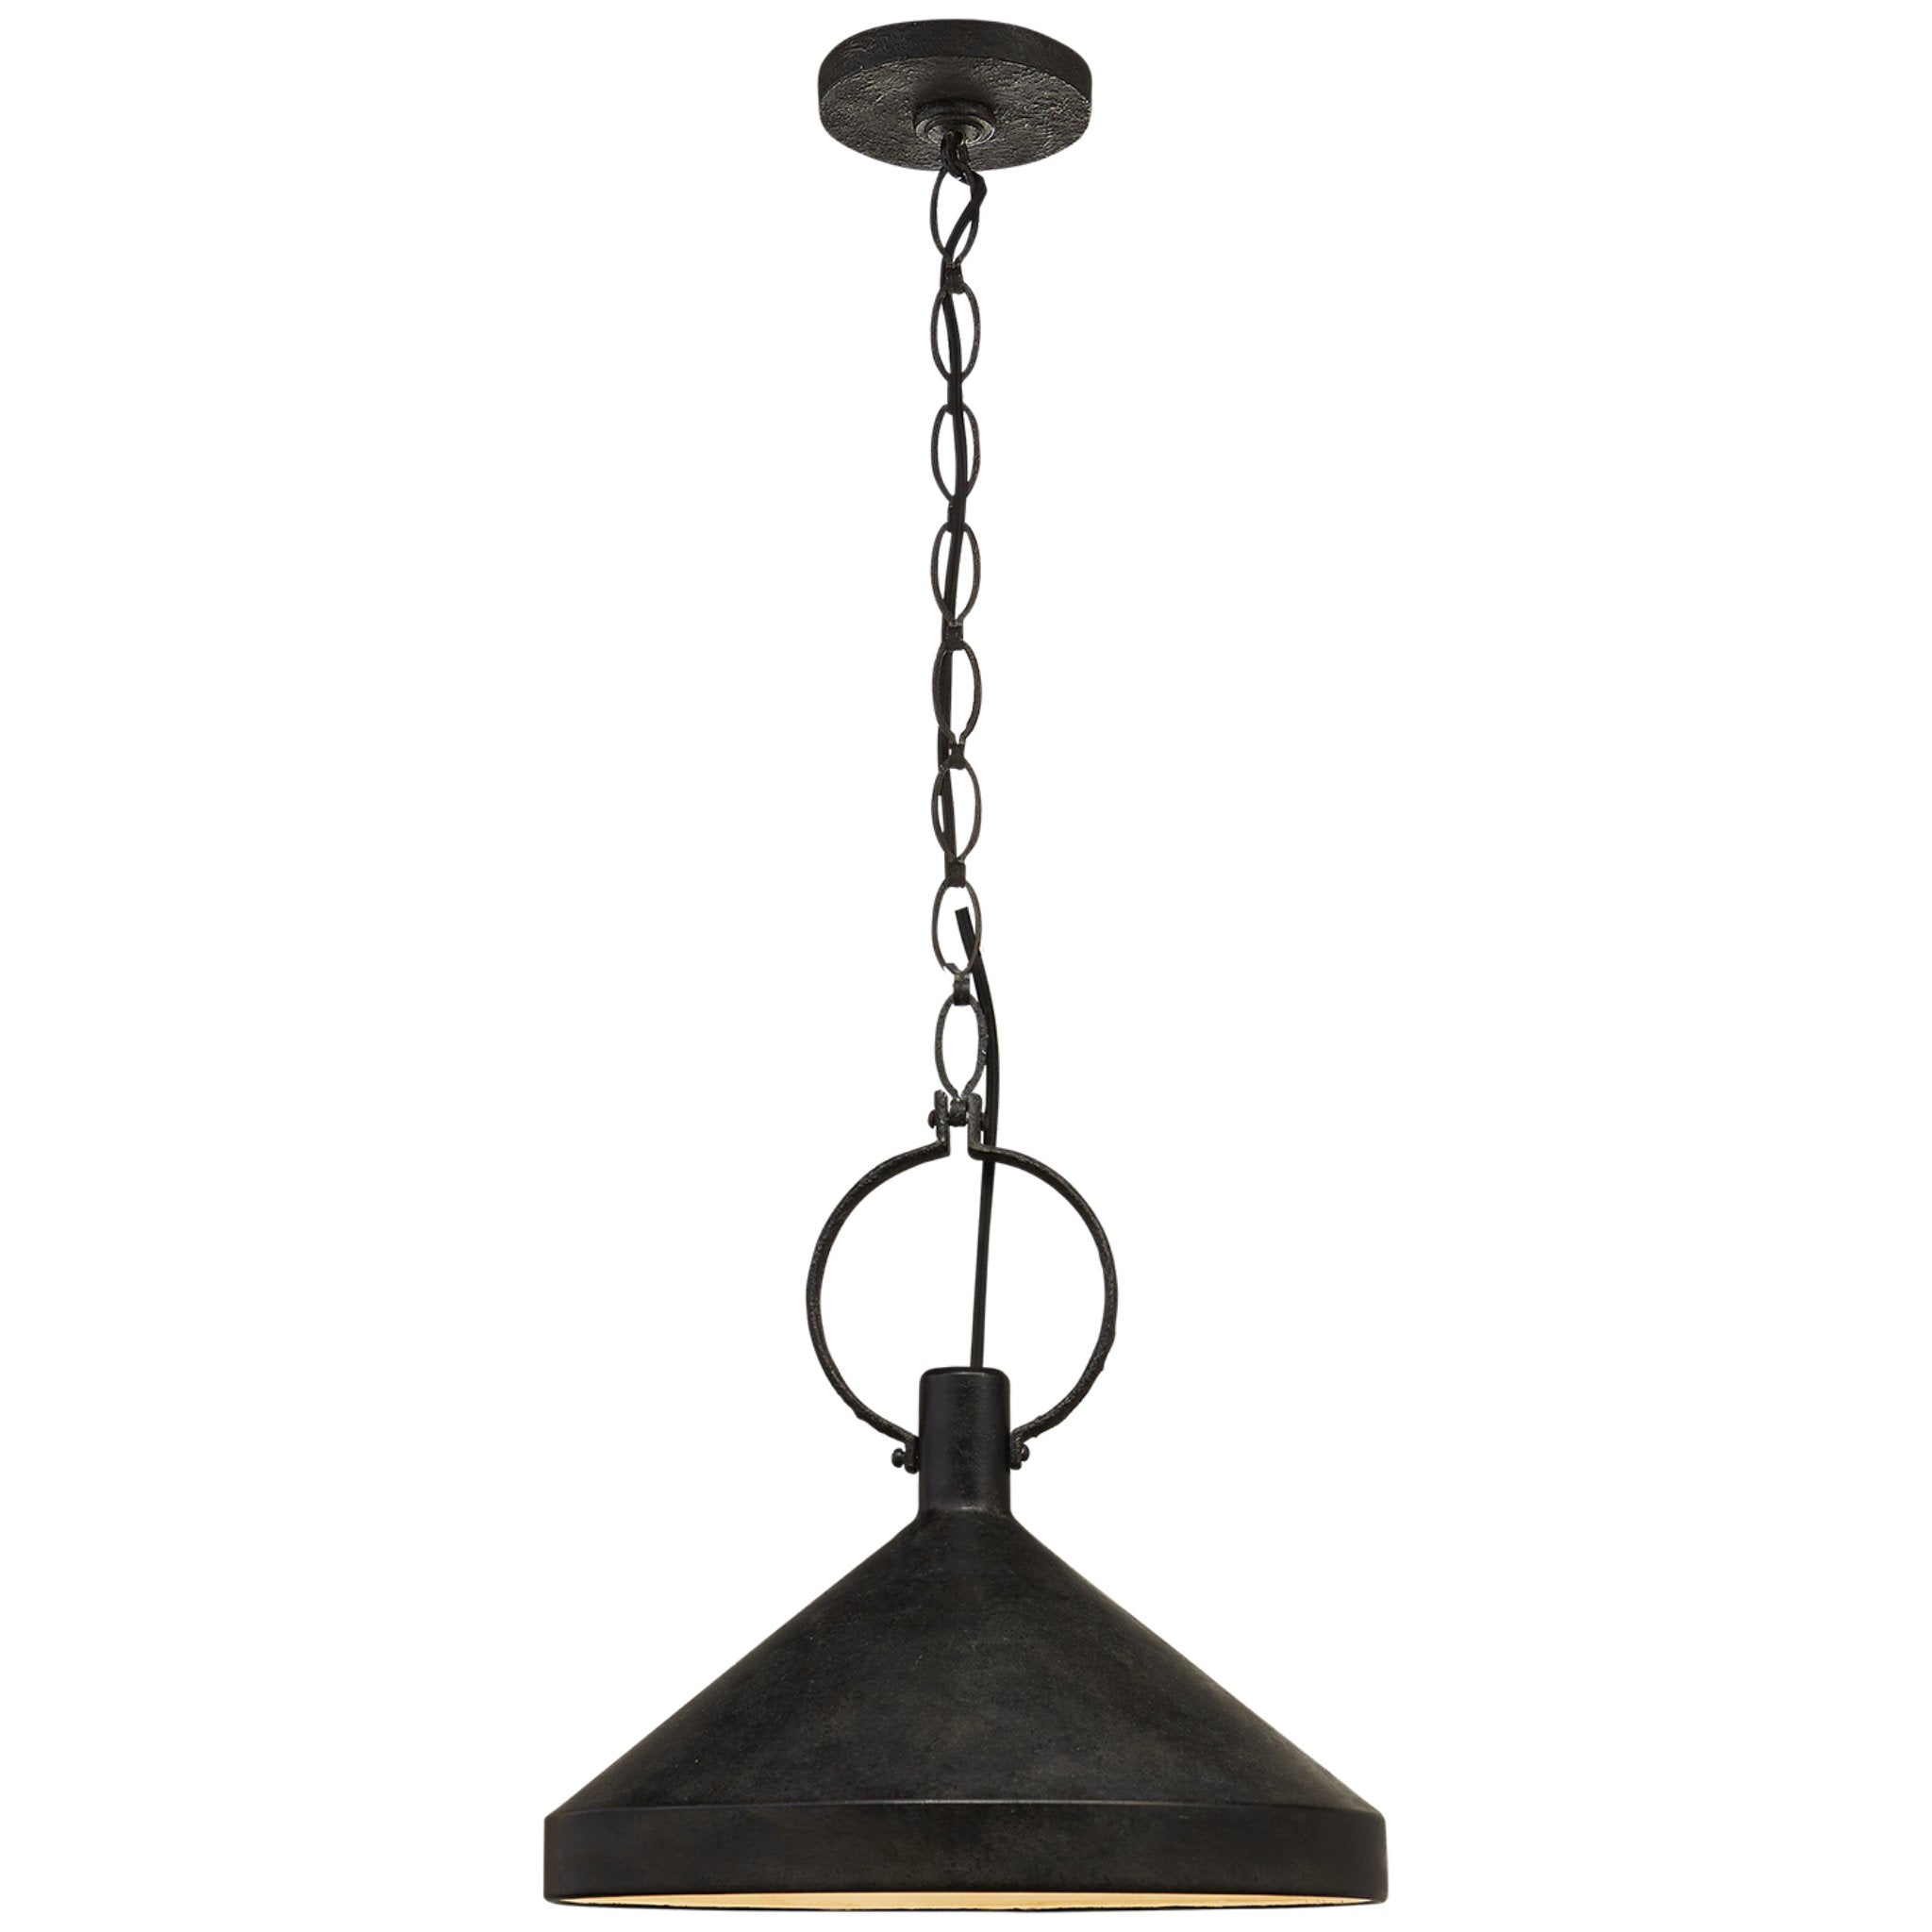 Suzanne Kasler Limoges Large Pendant in Natural Rust with Aged Iron Shade